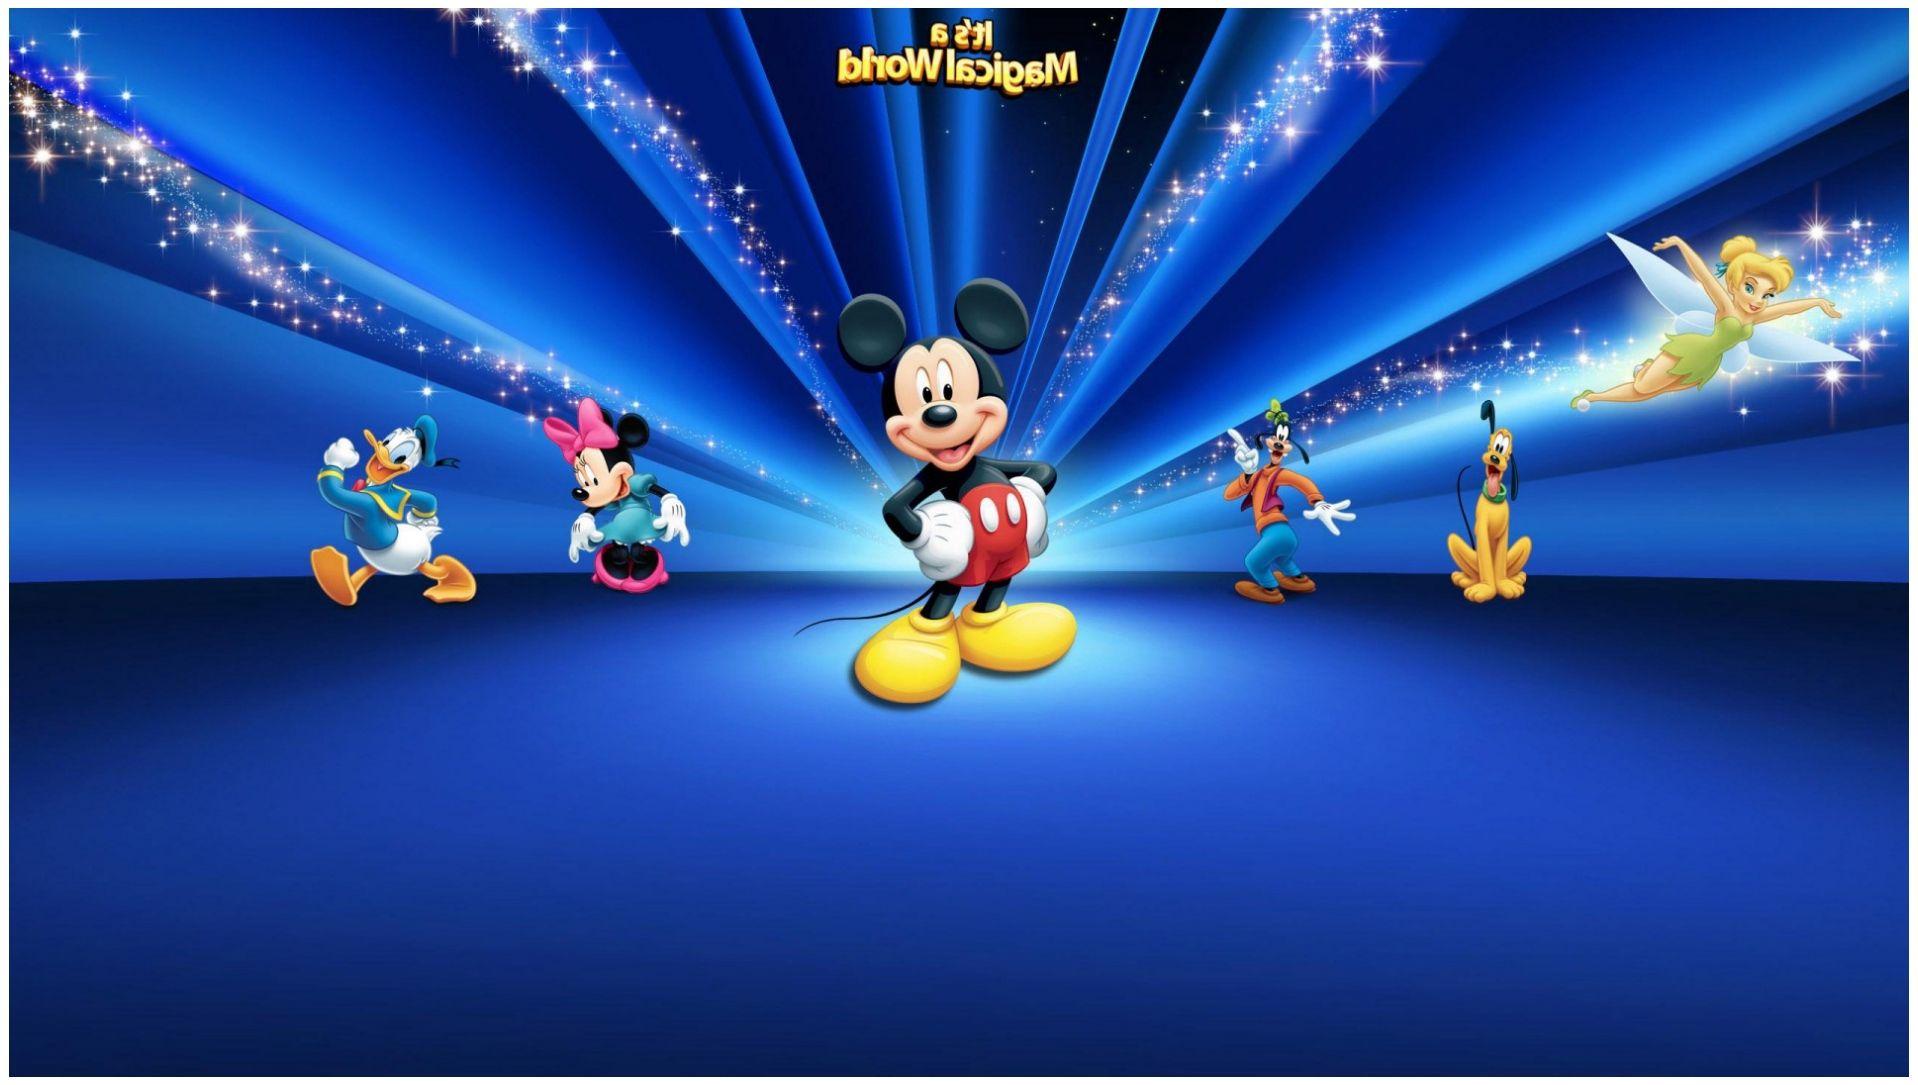 Mickey Mouse Wallpaper, Adorable 38 Mickey Mouse Pics FHDQ